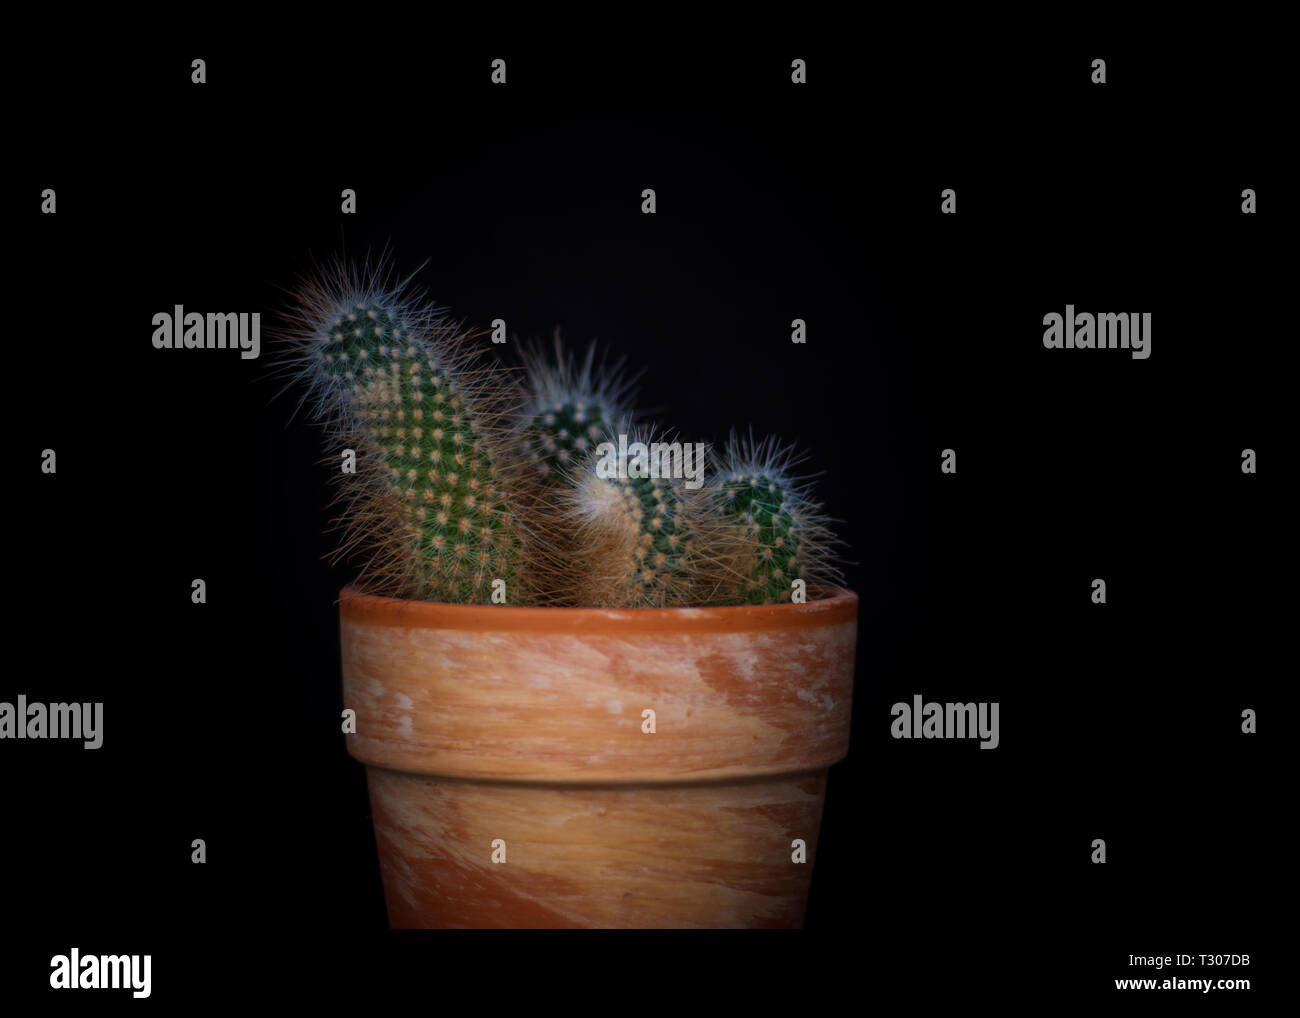 Cactus in a plant pot against a dark black background with only the plant in the light. Stock Photo